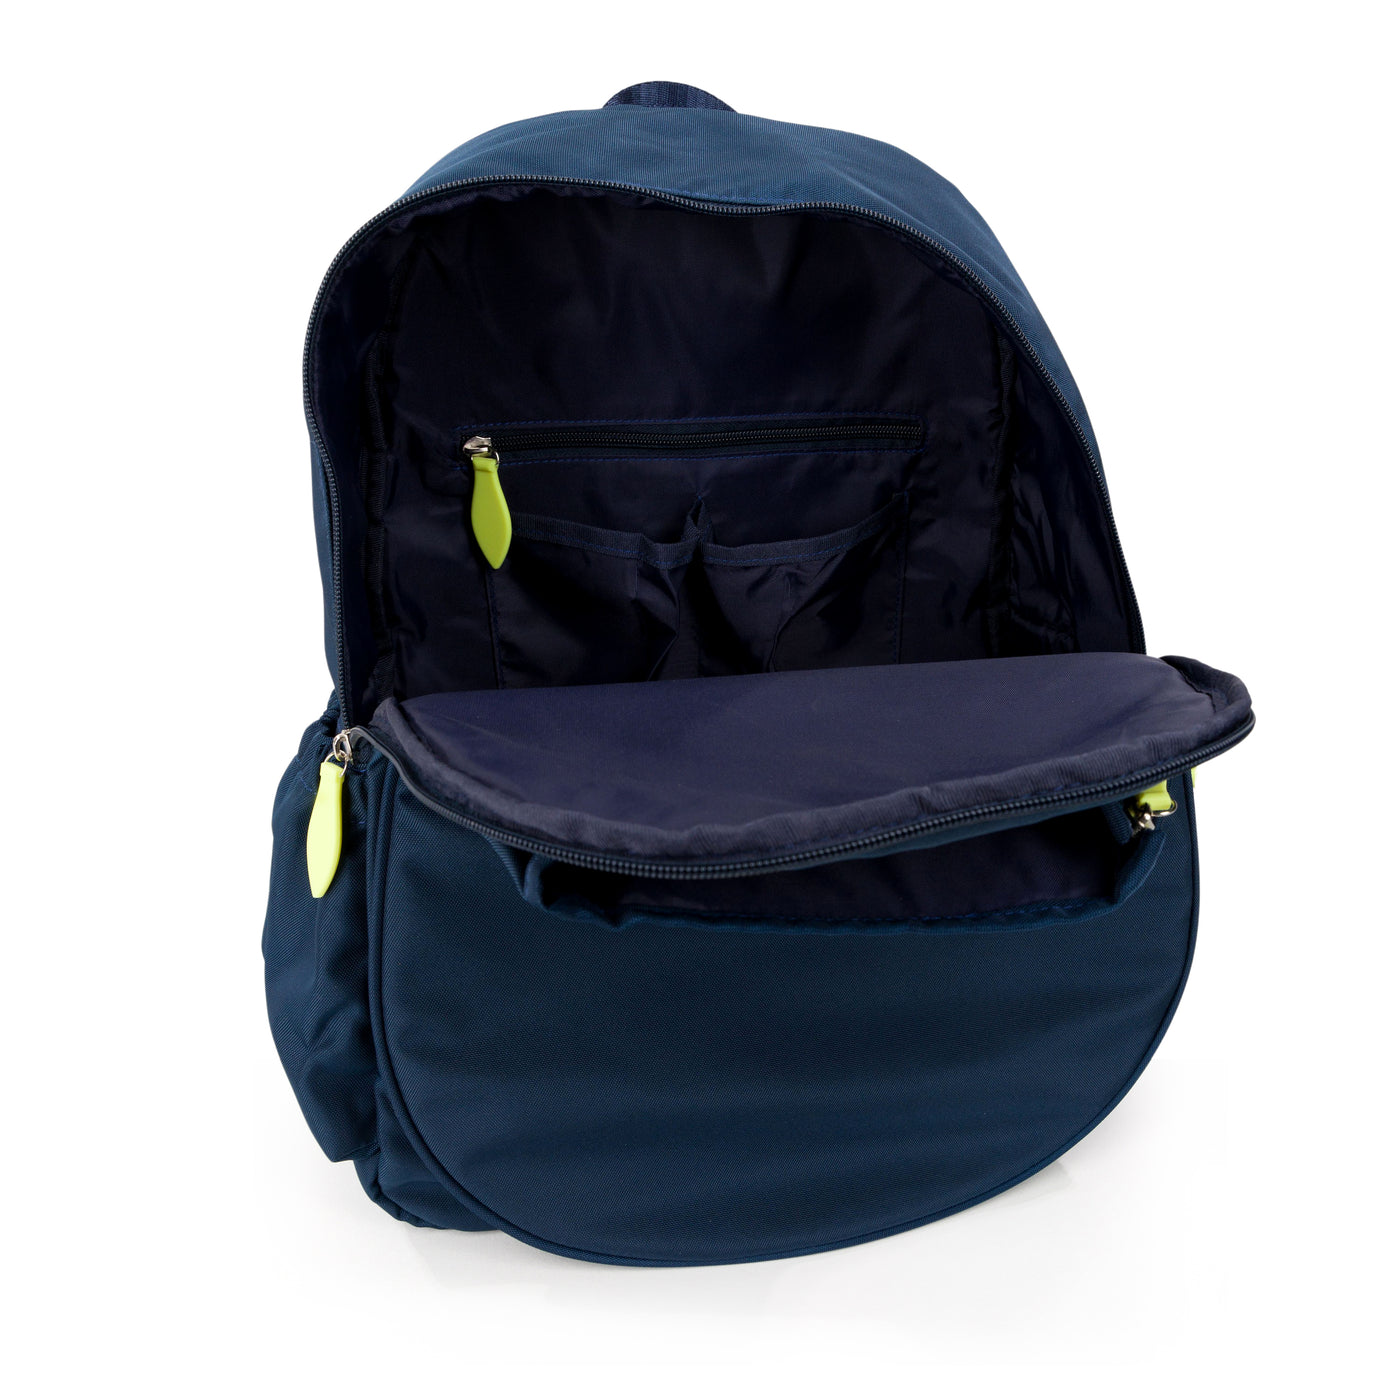 Inside view of navy tennis backpack with lime green zippers. Front pockets holds tennis racquets.